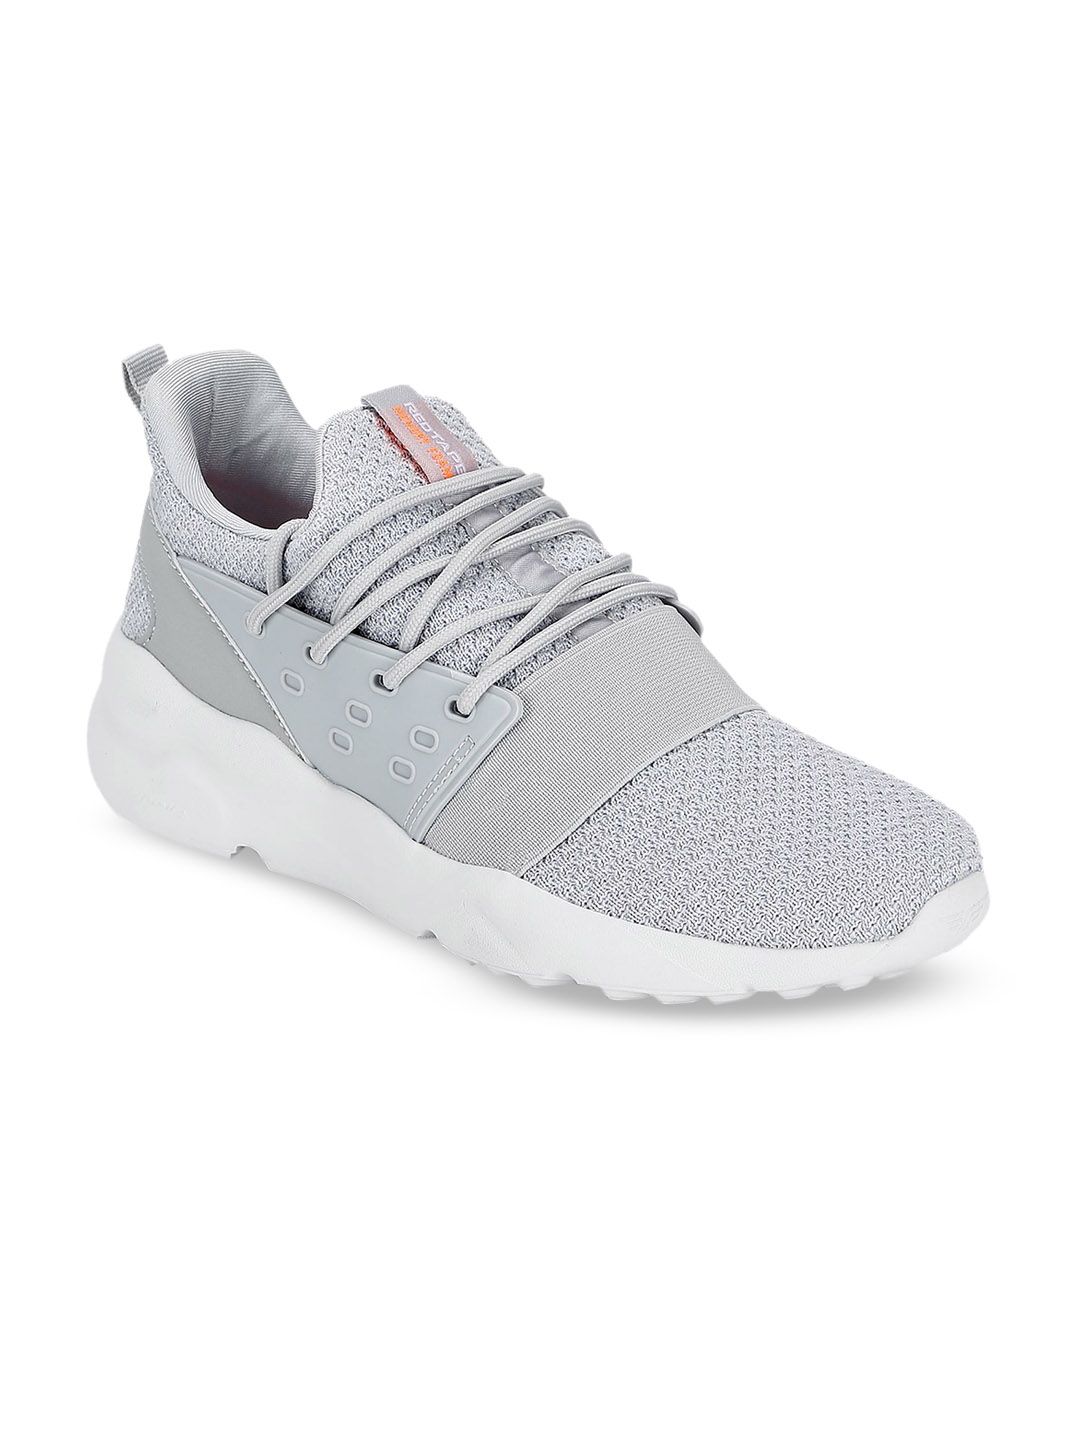 Red Tape Women Grey Textile Walking Shoes Price in India